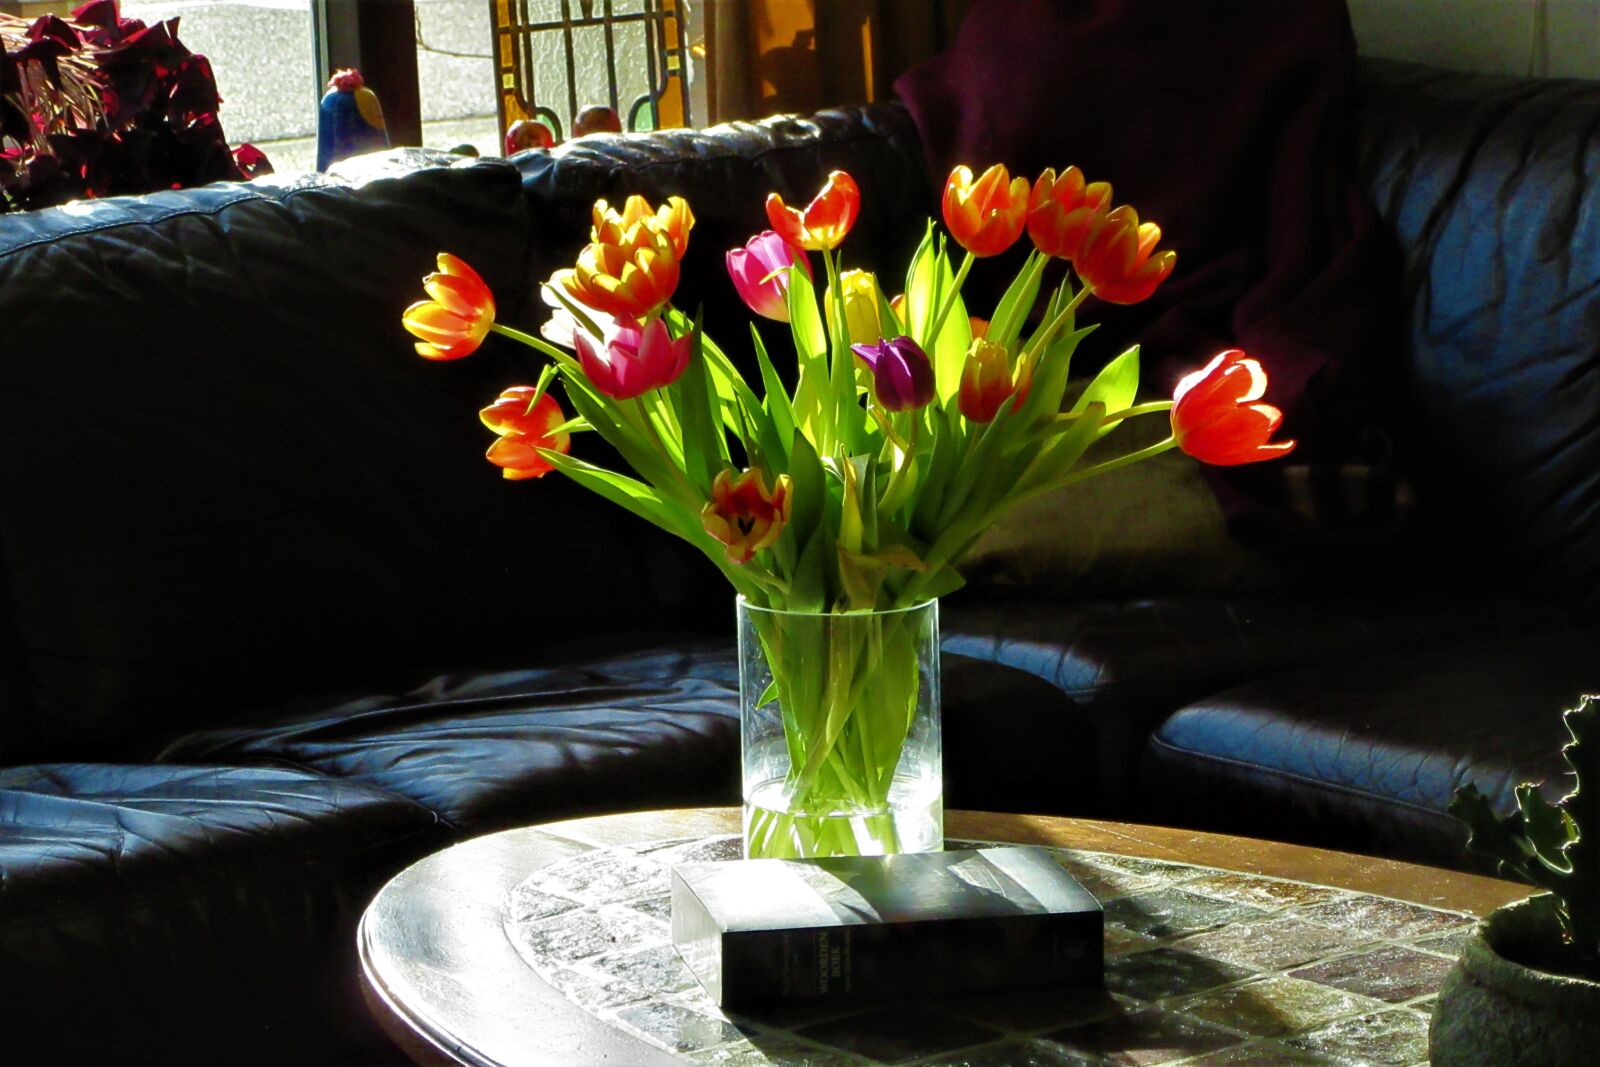 Canon PowerShot SX610 HS sample photo. Room, tulips, at home photography